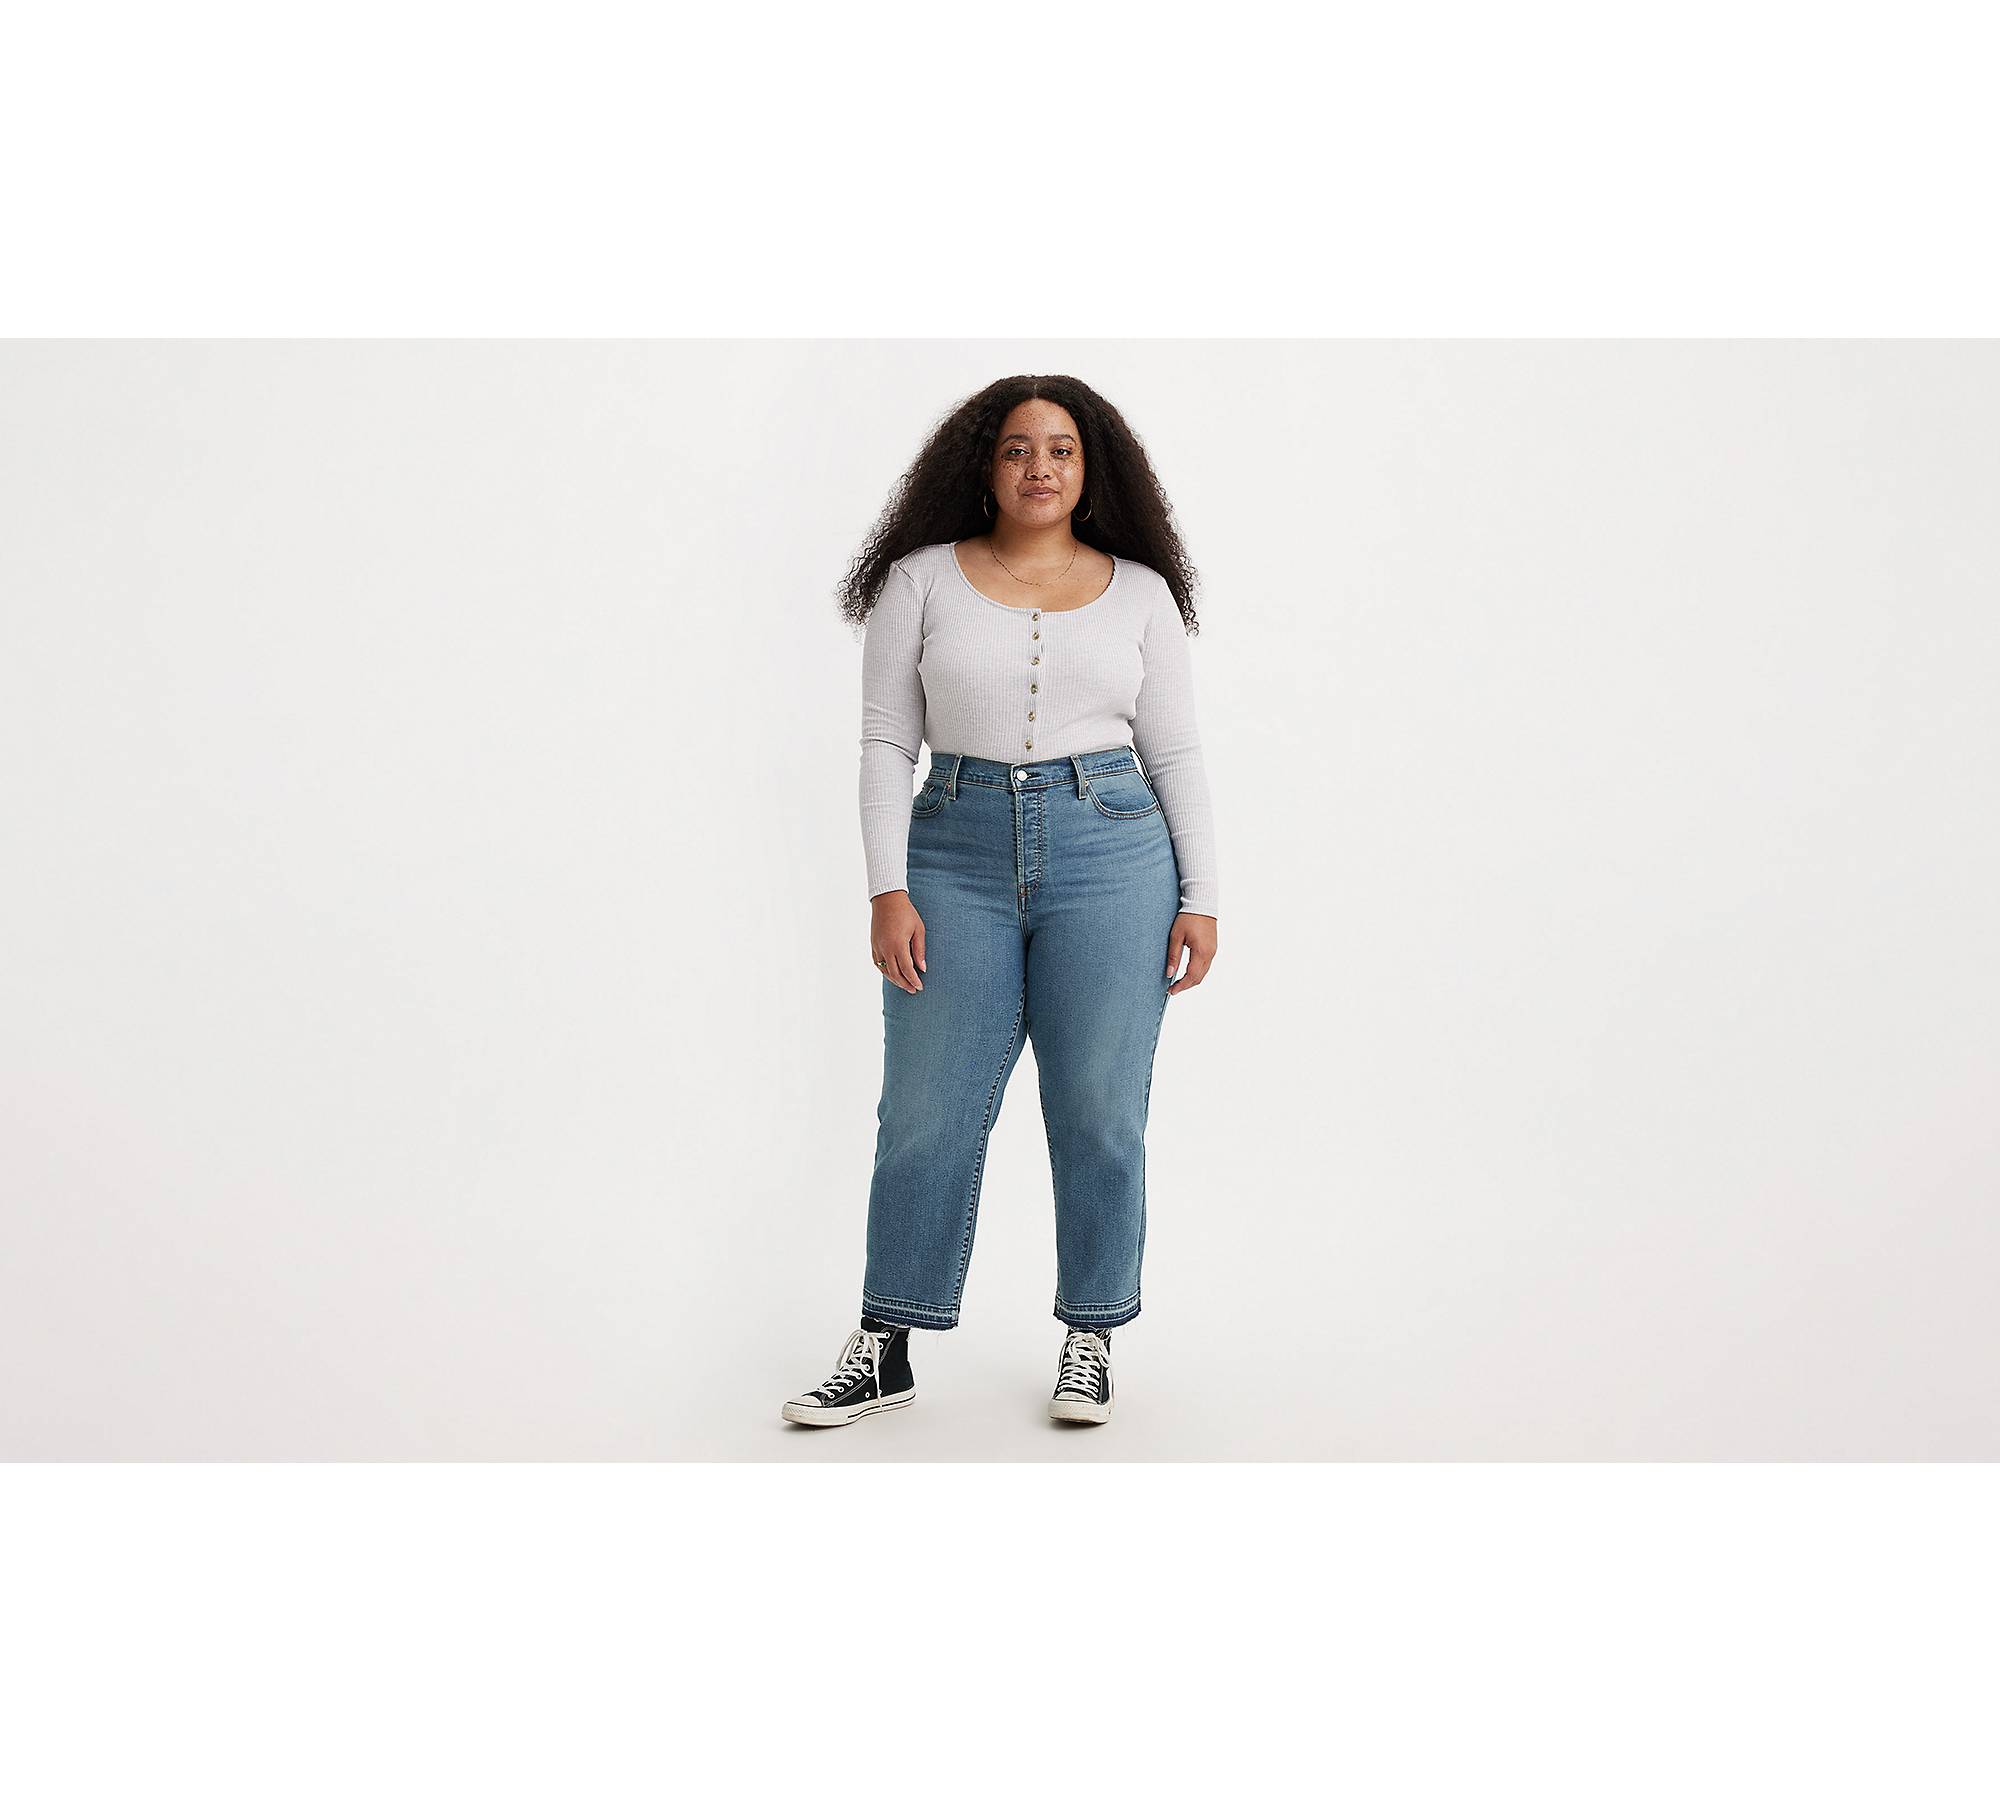 Plus Size High Waisted Straight Leg Jeans